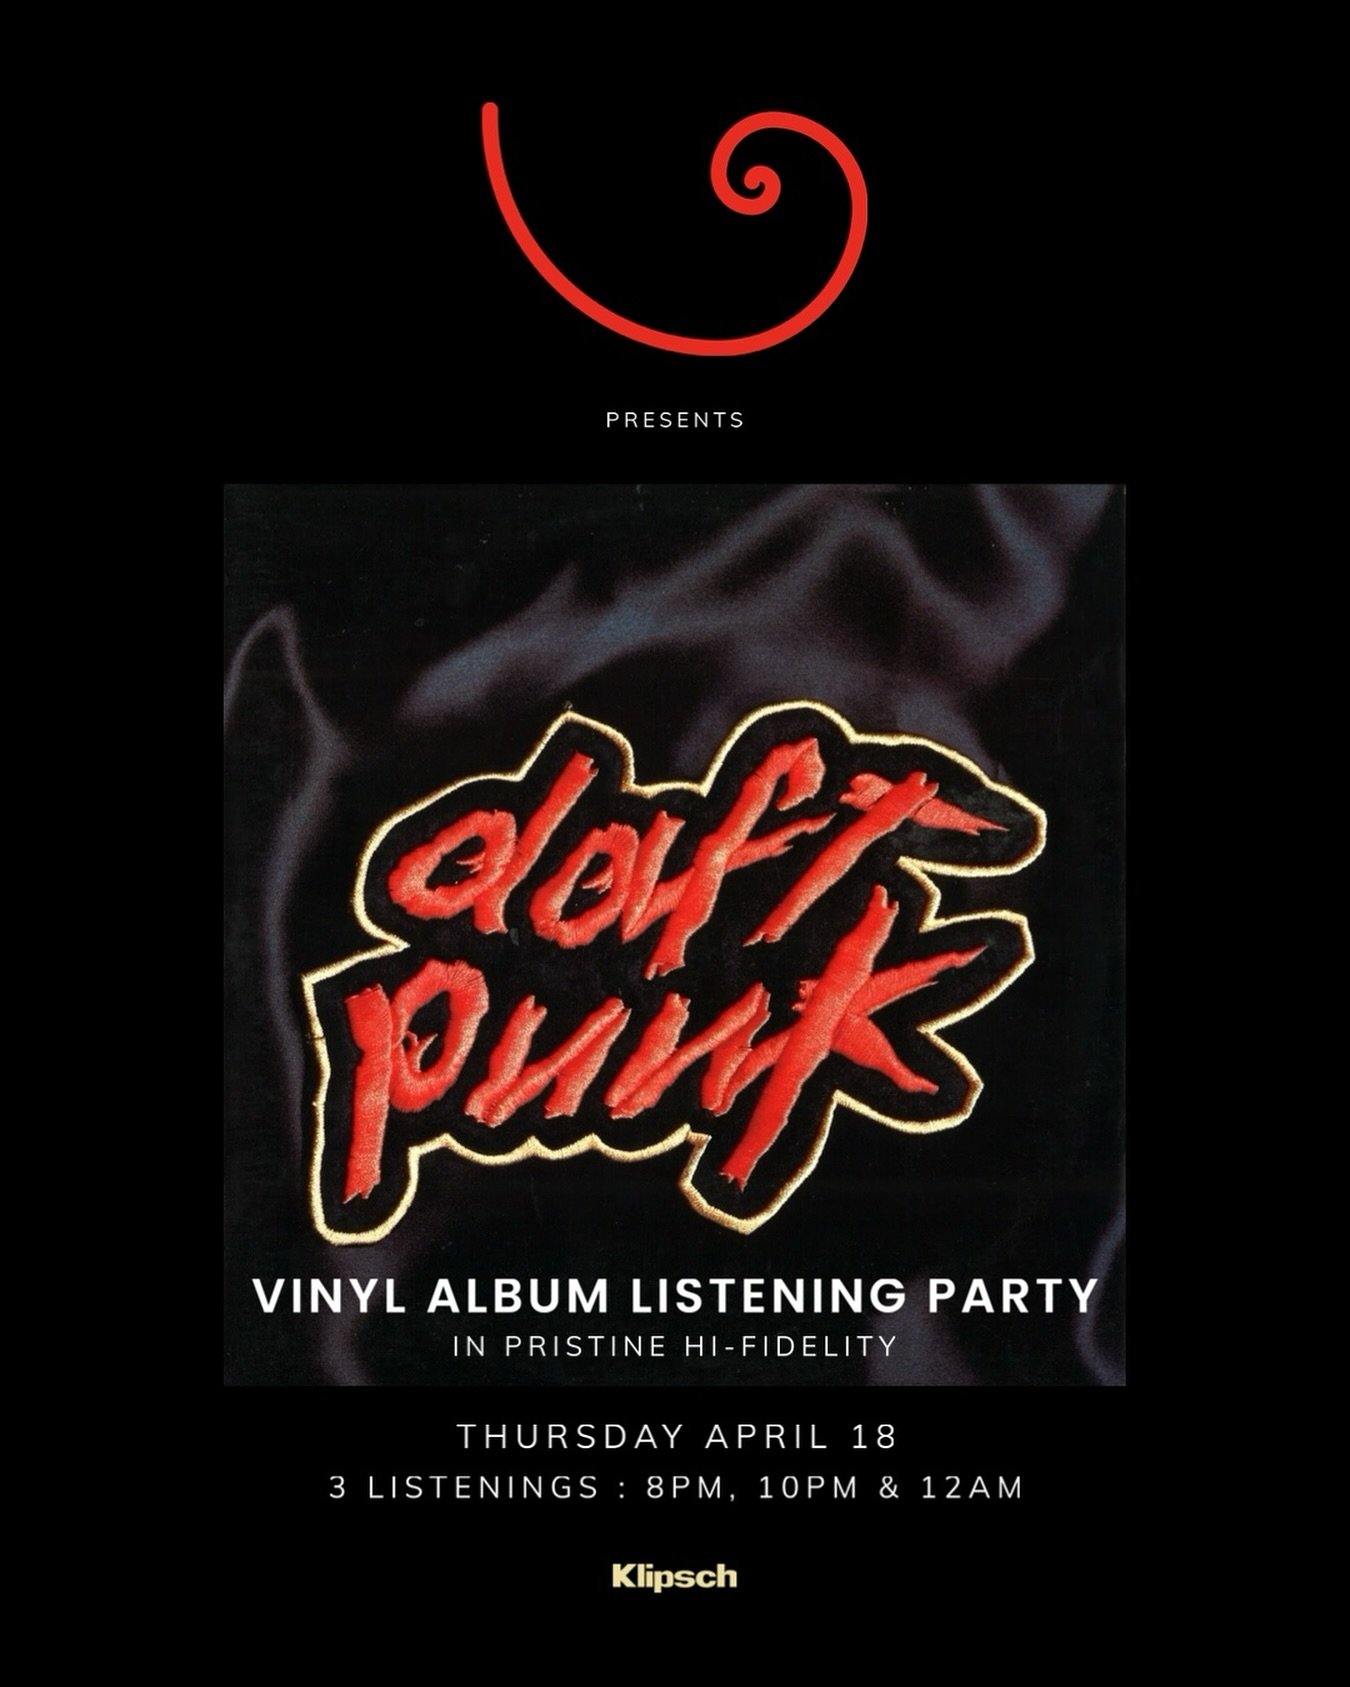 After the smashing success of our first @daftpunk vinyl listening party, we bring the robots back for round 2. This time, their legendary first album, &ldquo;Homework&rdquo;.

Experience the album like never before on vinyl through our Klipschorn sou